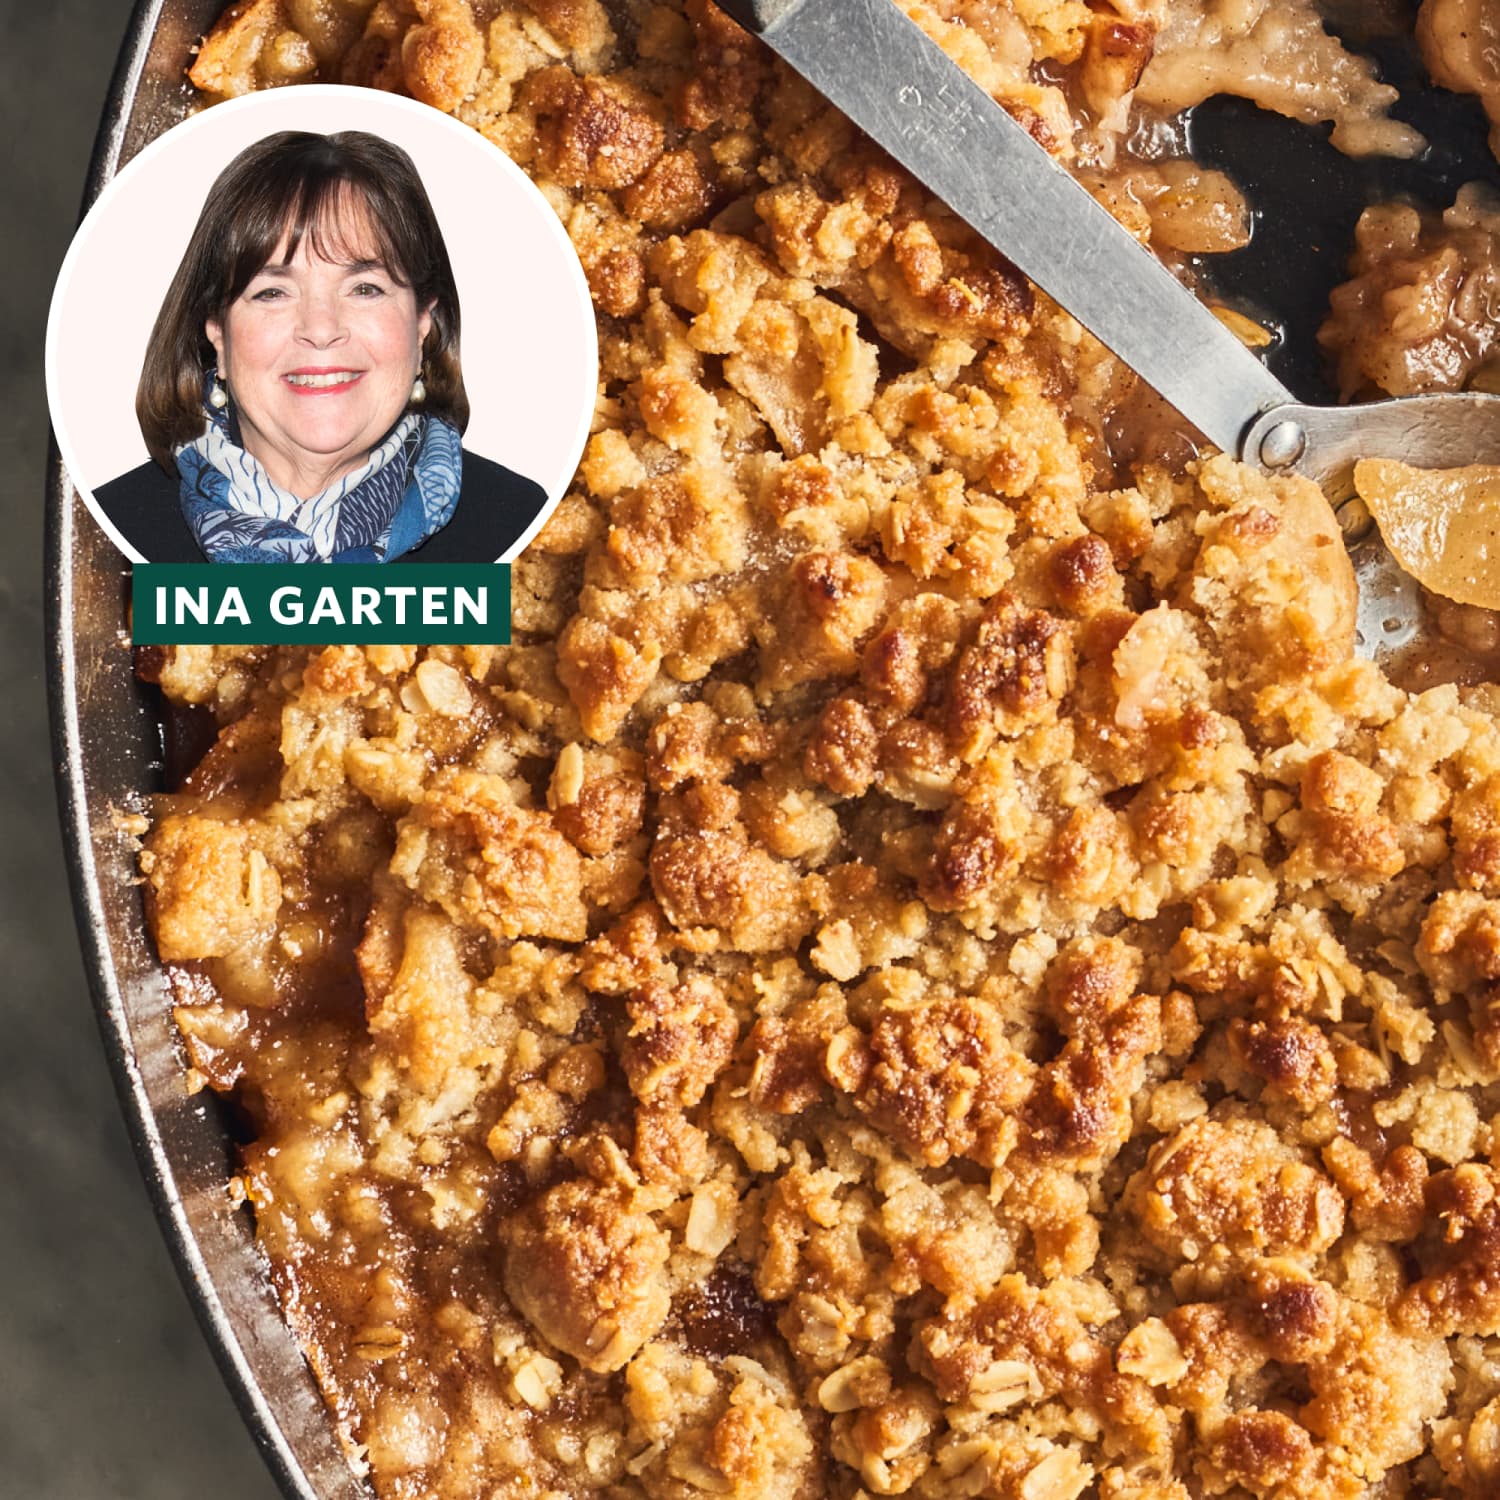 Old Fashioned Apple Crisp - Barefeet in the Kitchen